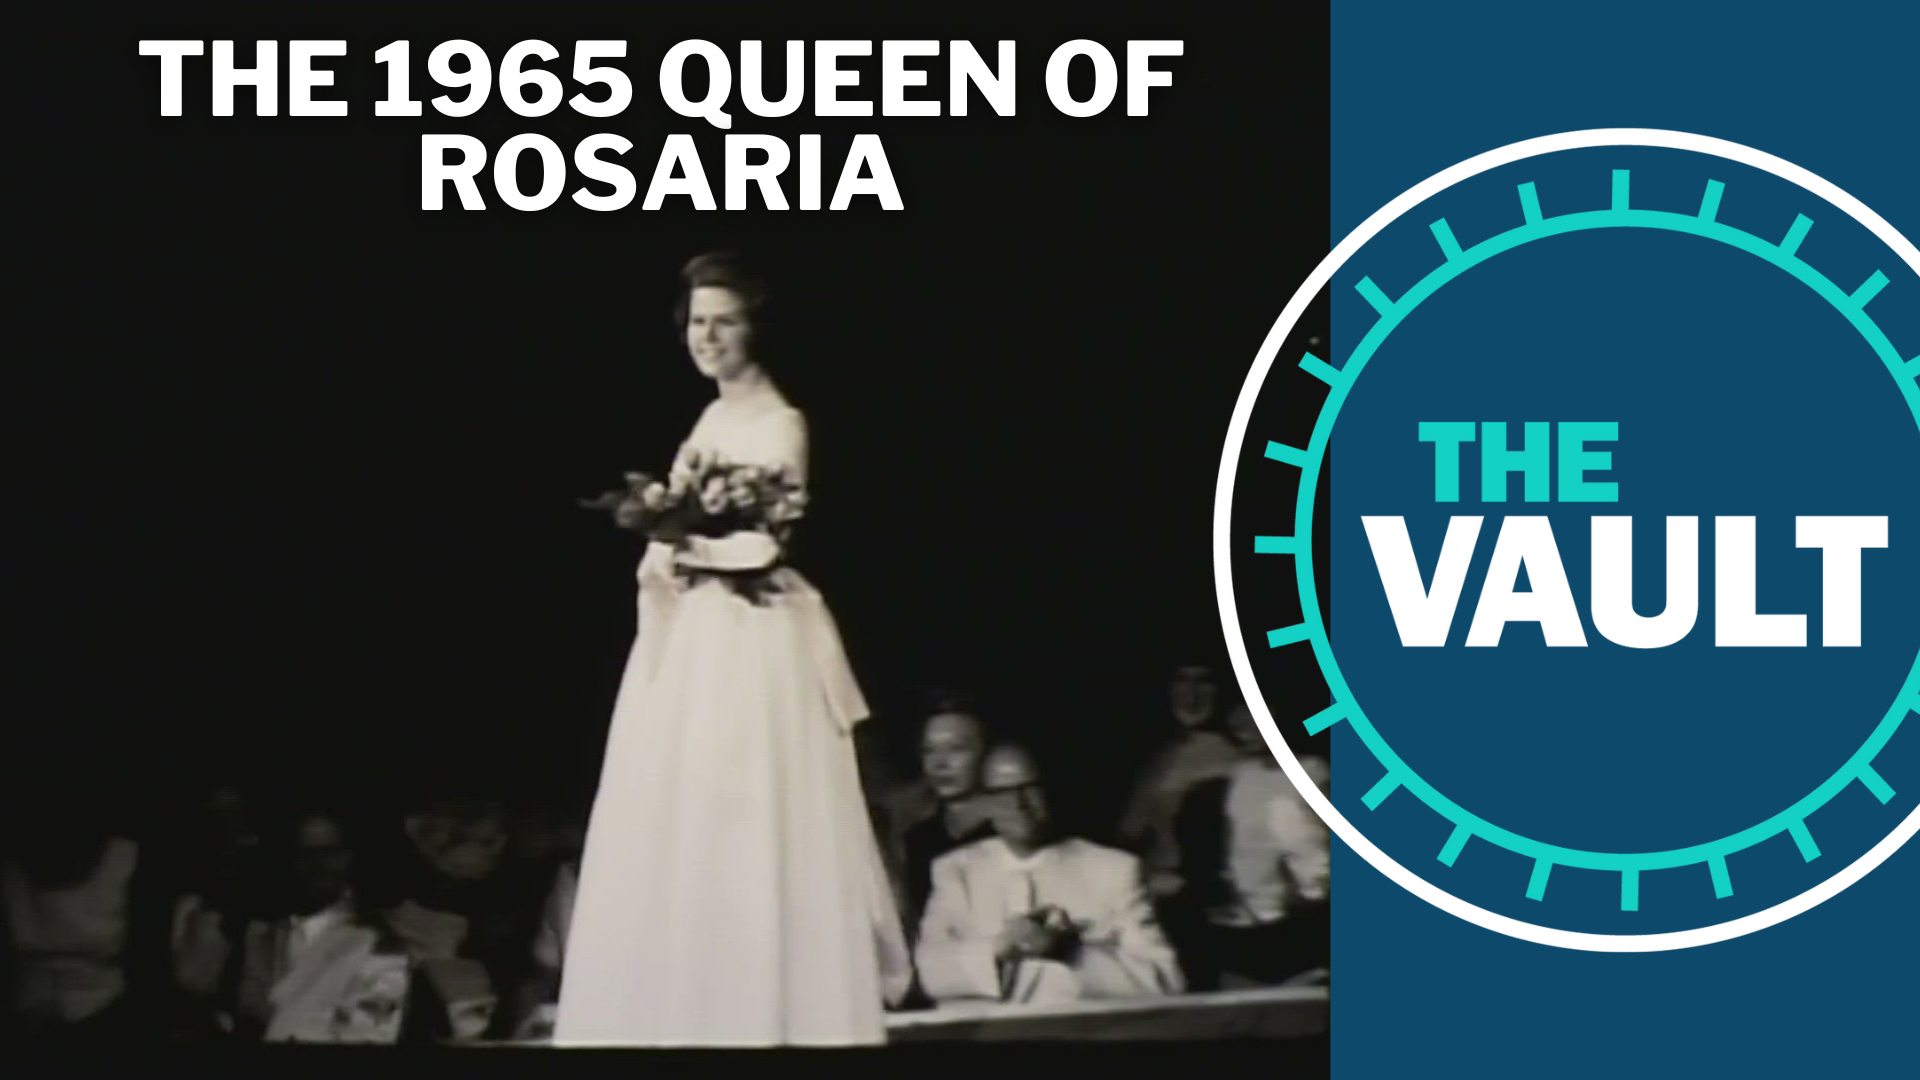 Some of Portland's Rose Festival traditions go way back, even if they've changed significantly over time. Here's a look back at the Rose Festival Court of 1965.